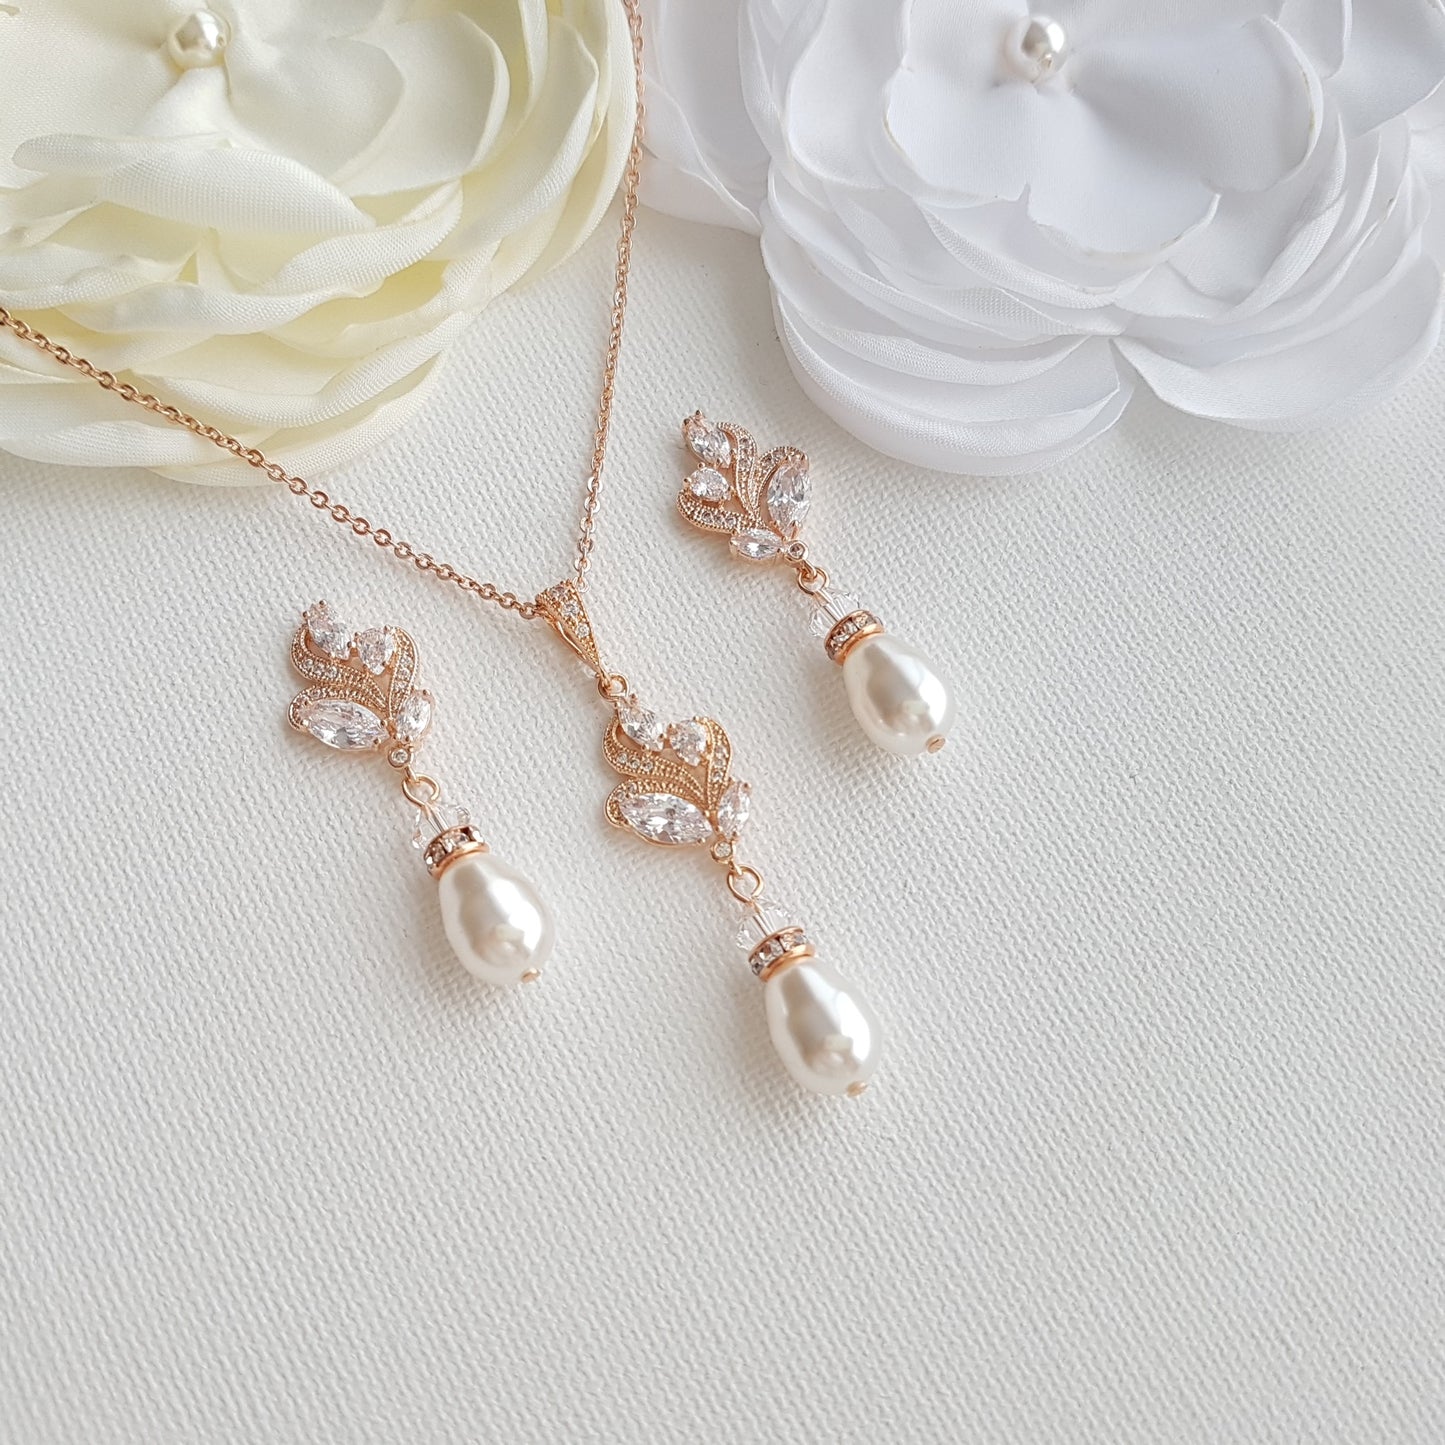 Vintage Style Pearl Jewelry Set for Brides in Rose Gold-Wavy